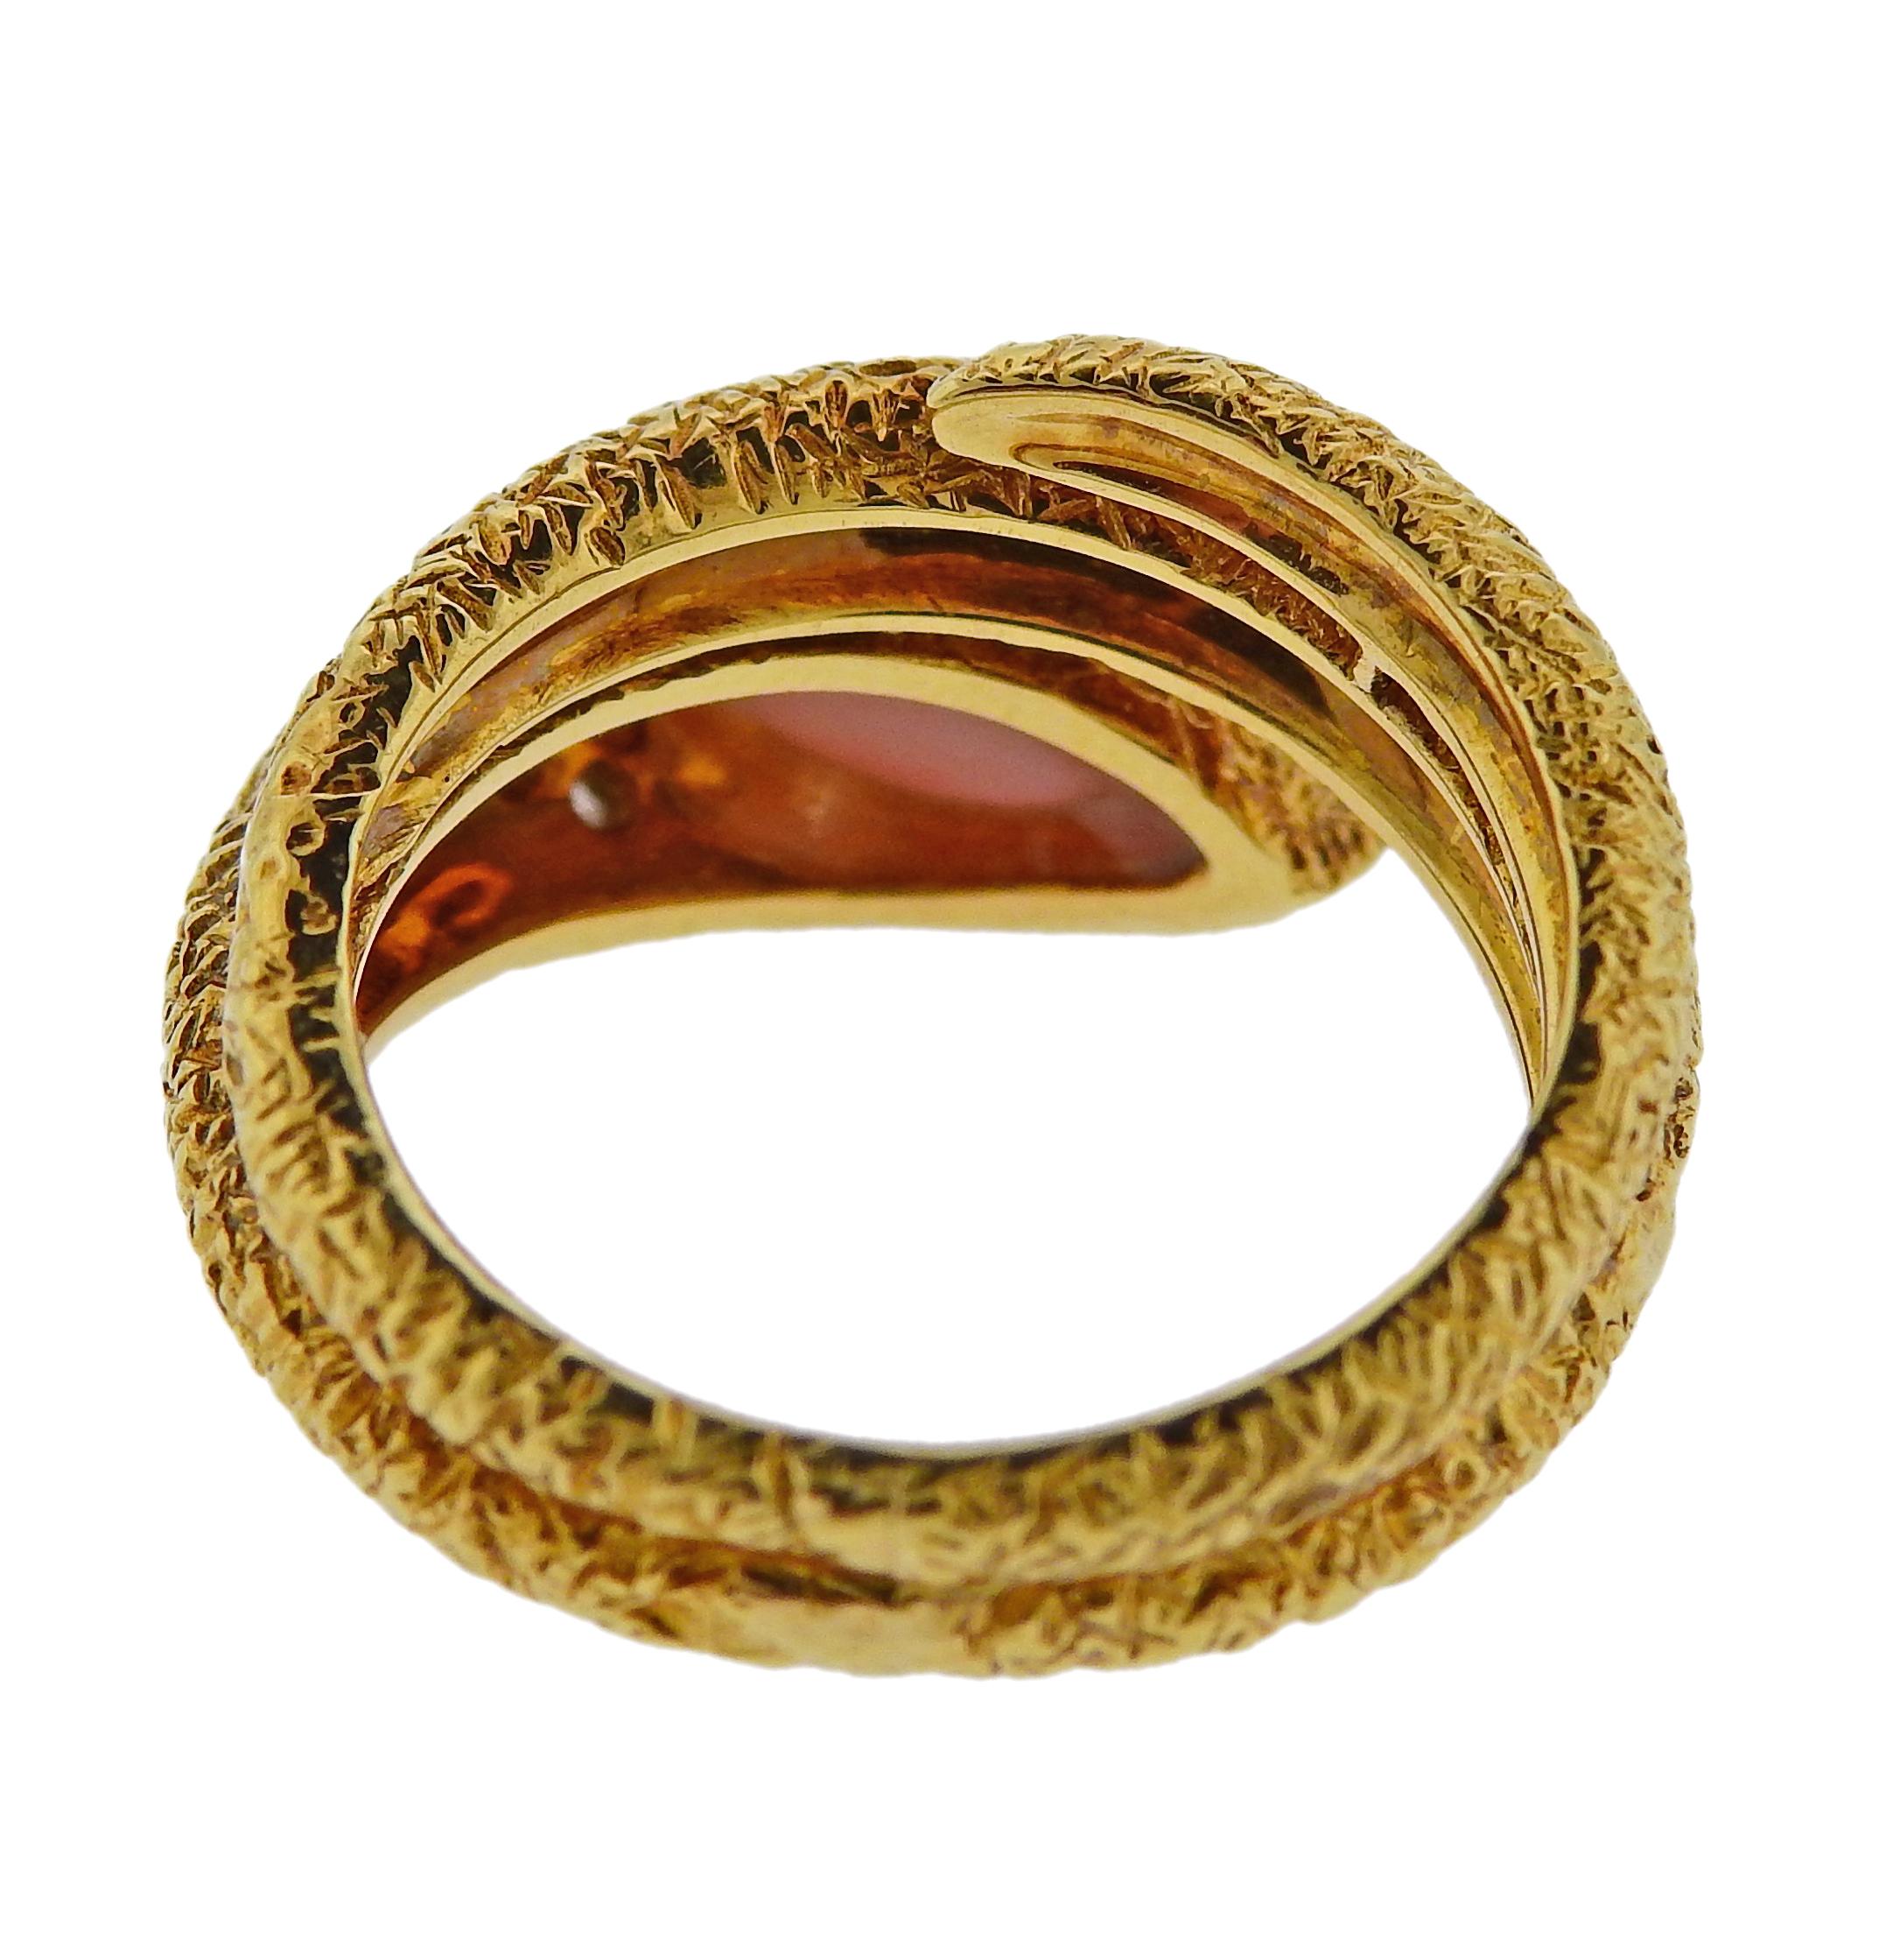 1970s Van Cleef & Arpels Coral Diamond Gold Ring In Excellent Condition For Sale In Lambertville, NJ